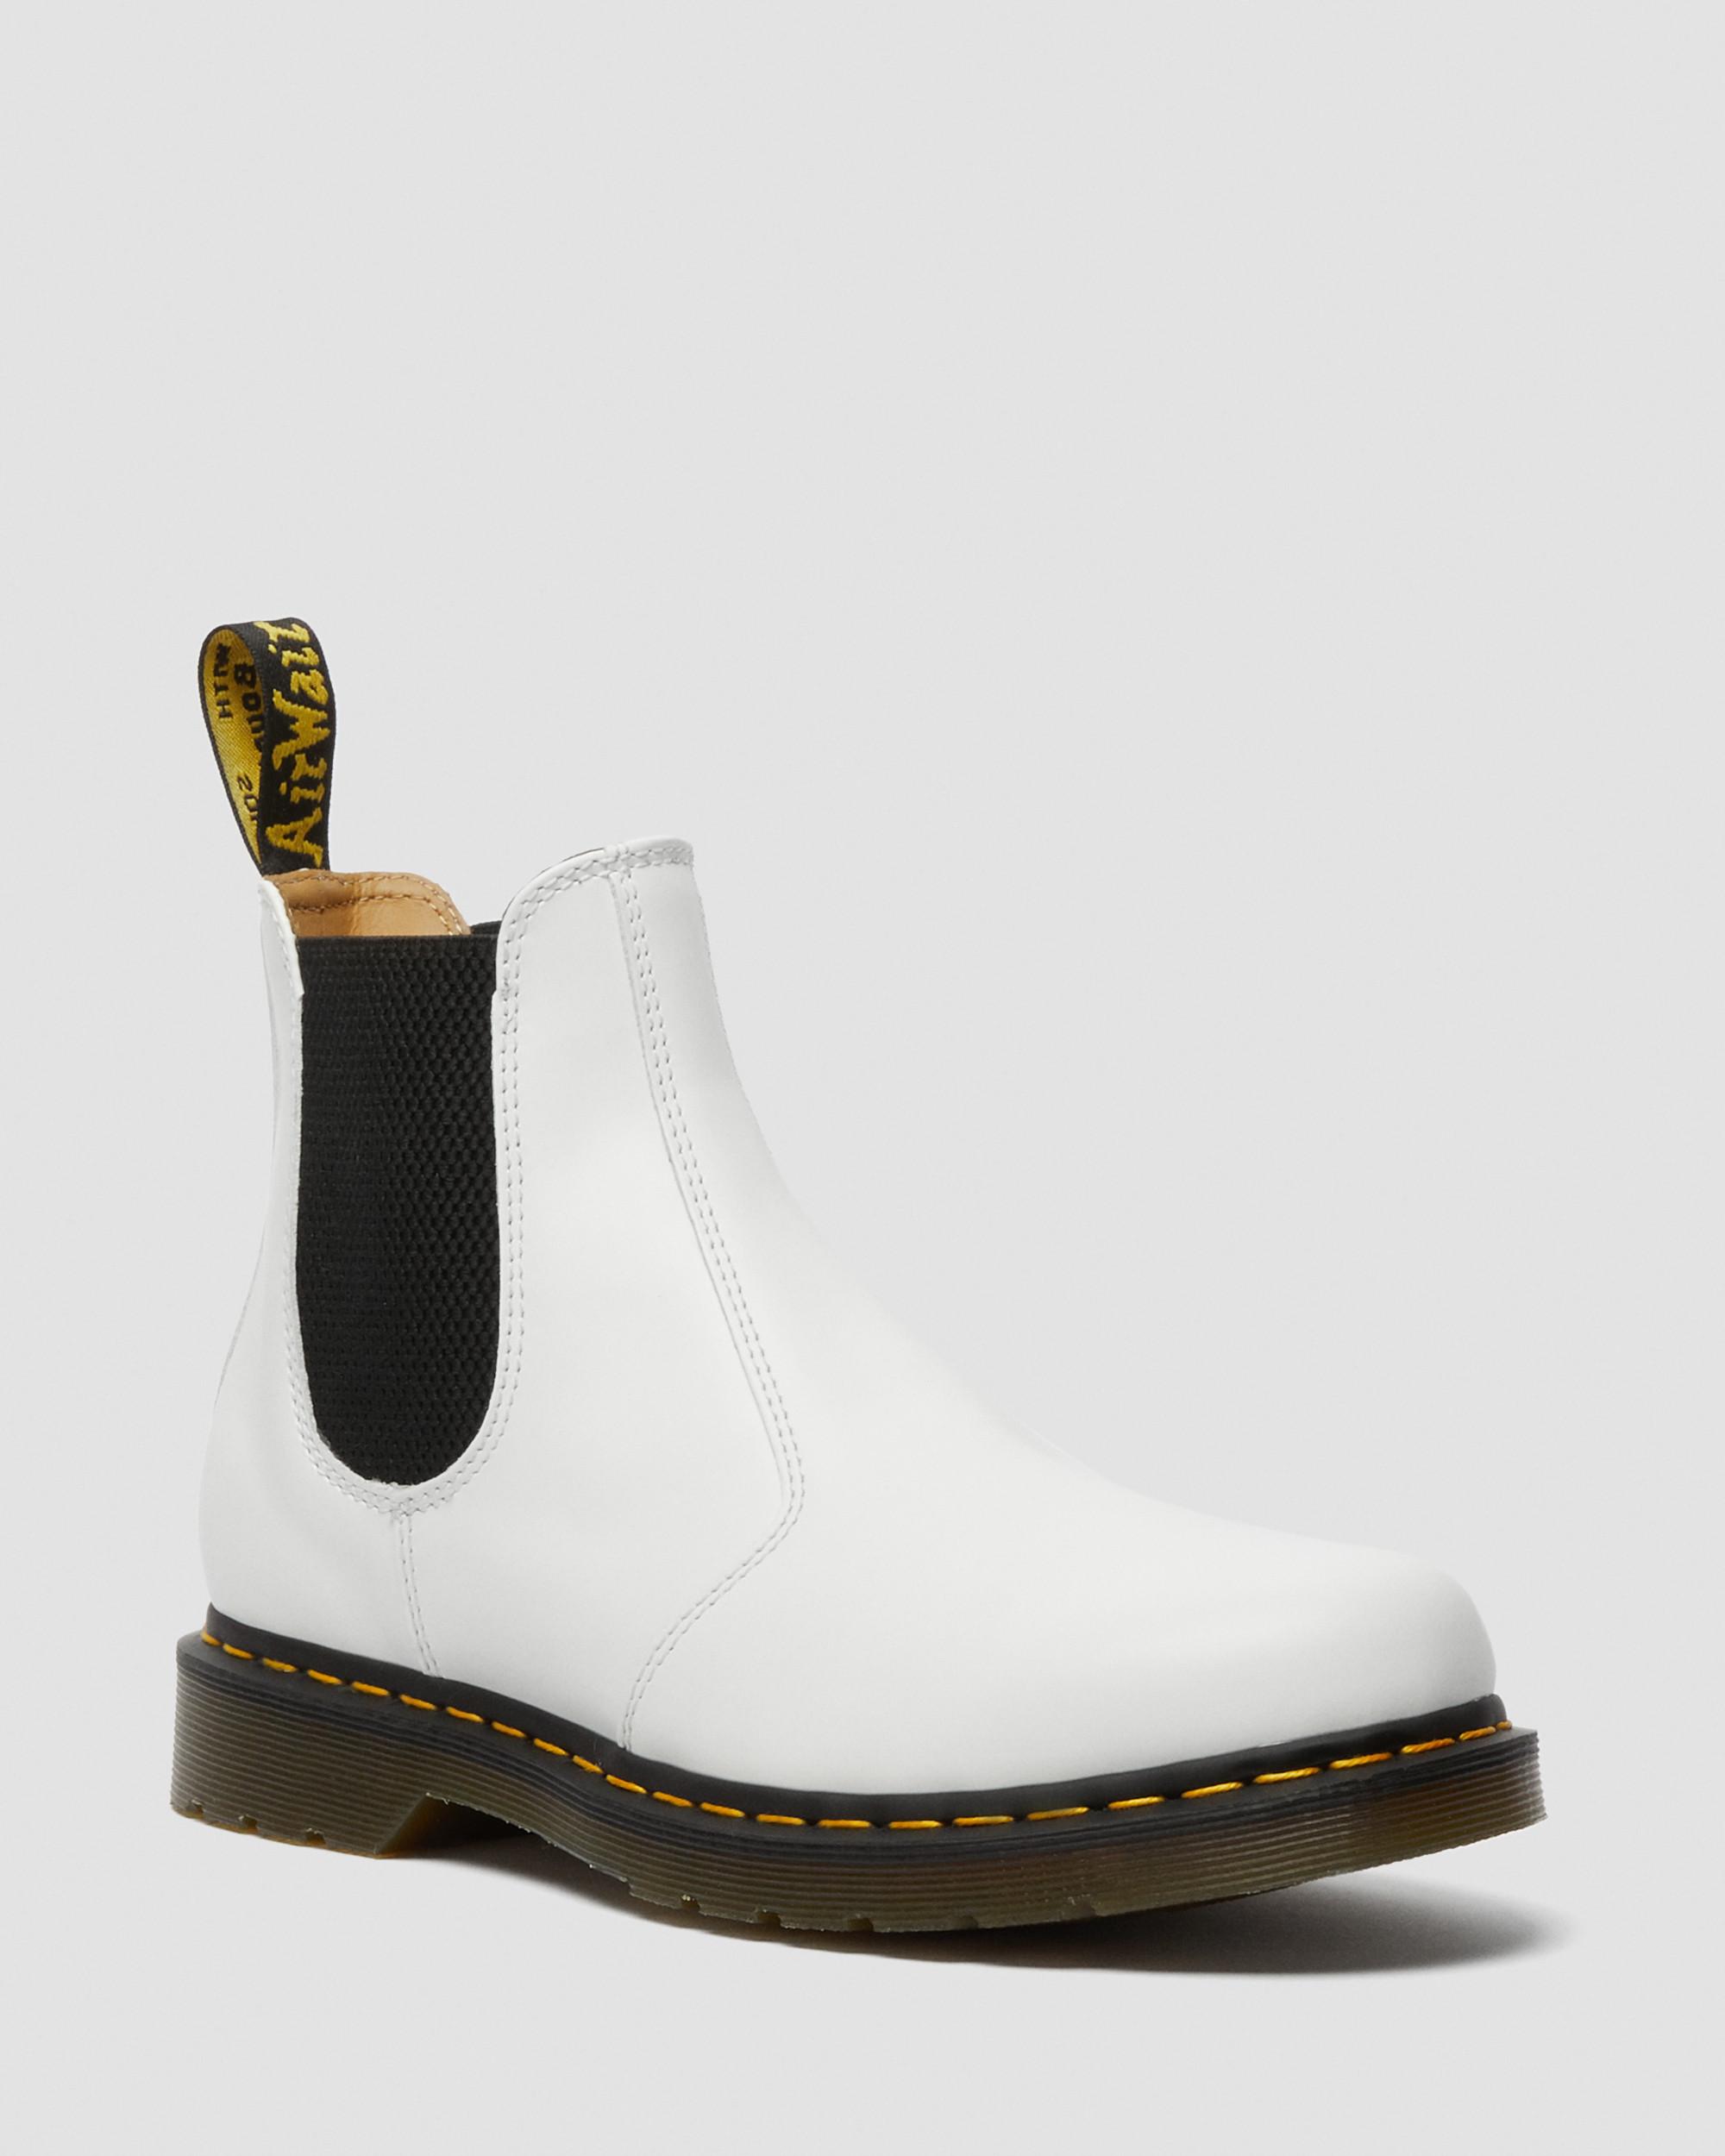 Dr Martens 2976 YS Women's Classic Leather Chelsea Boot in White Size 11 